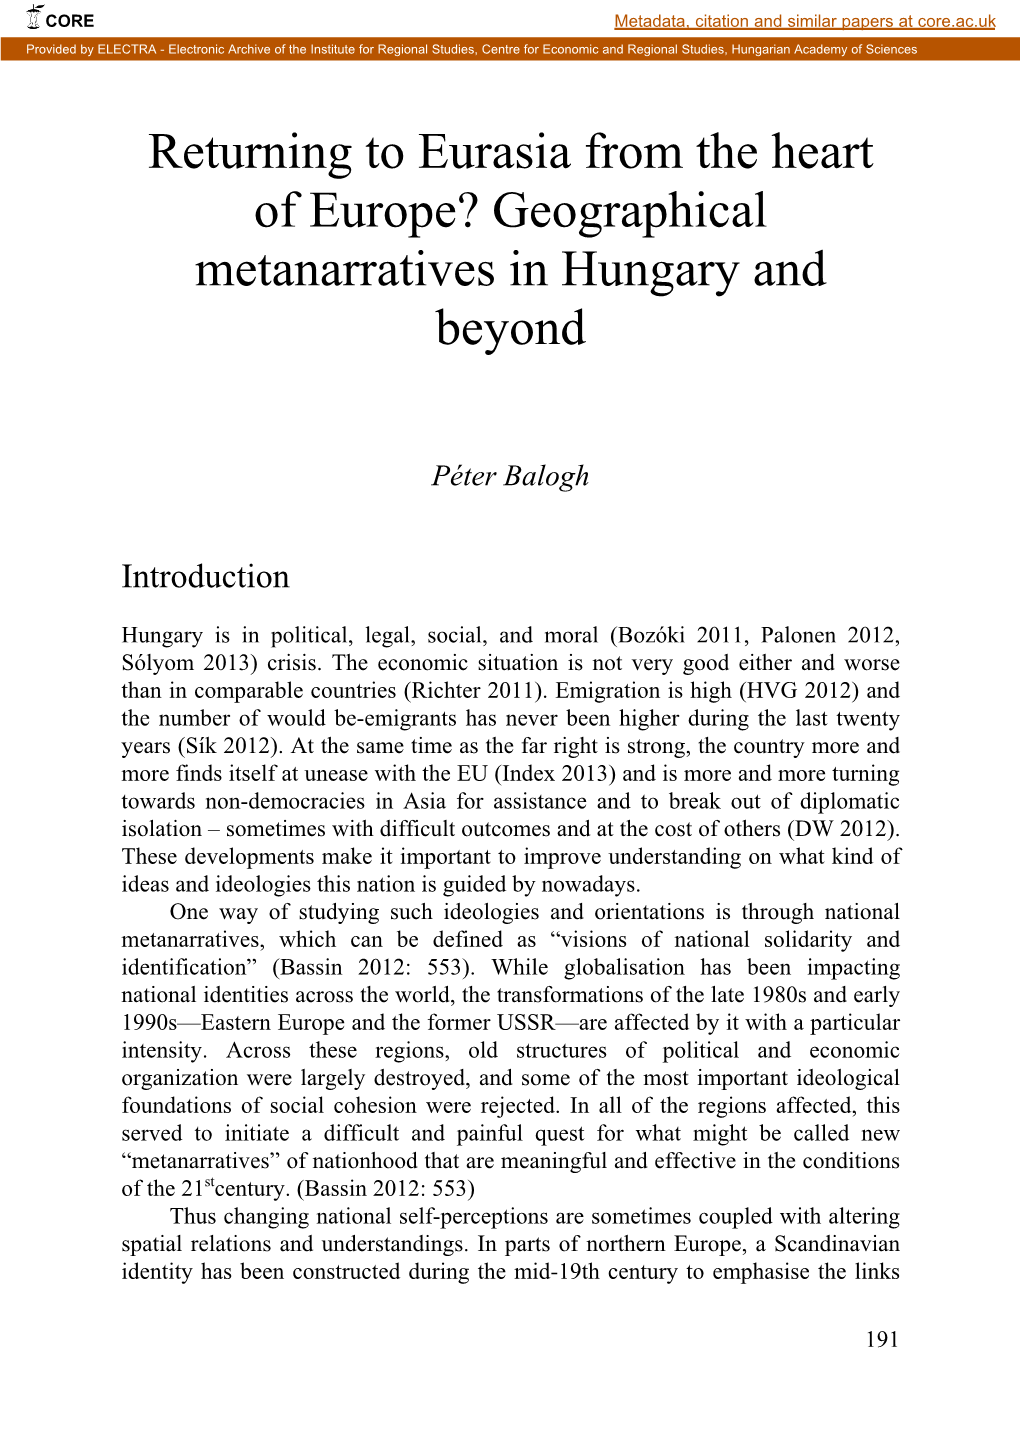 Geographical Metanarratives in Hungary and Beyond